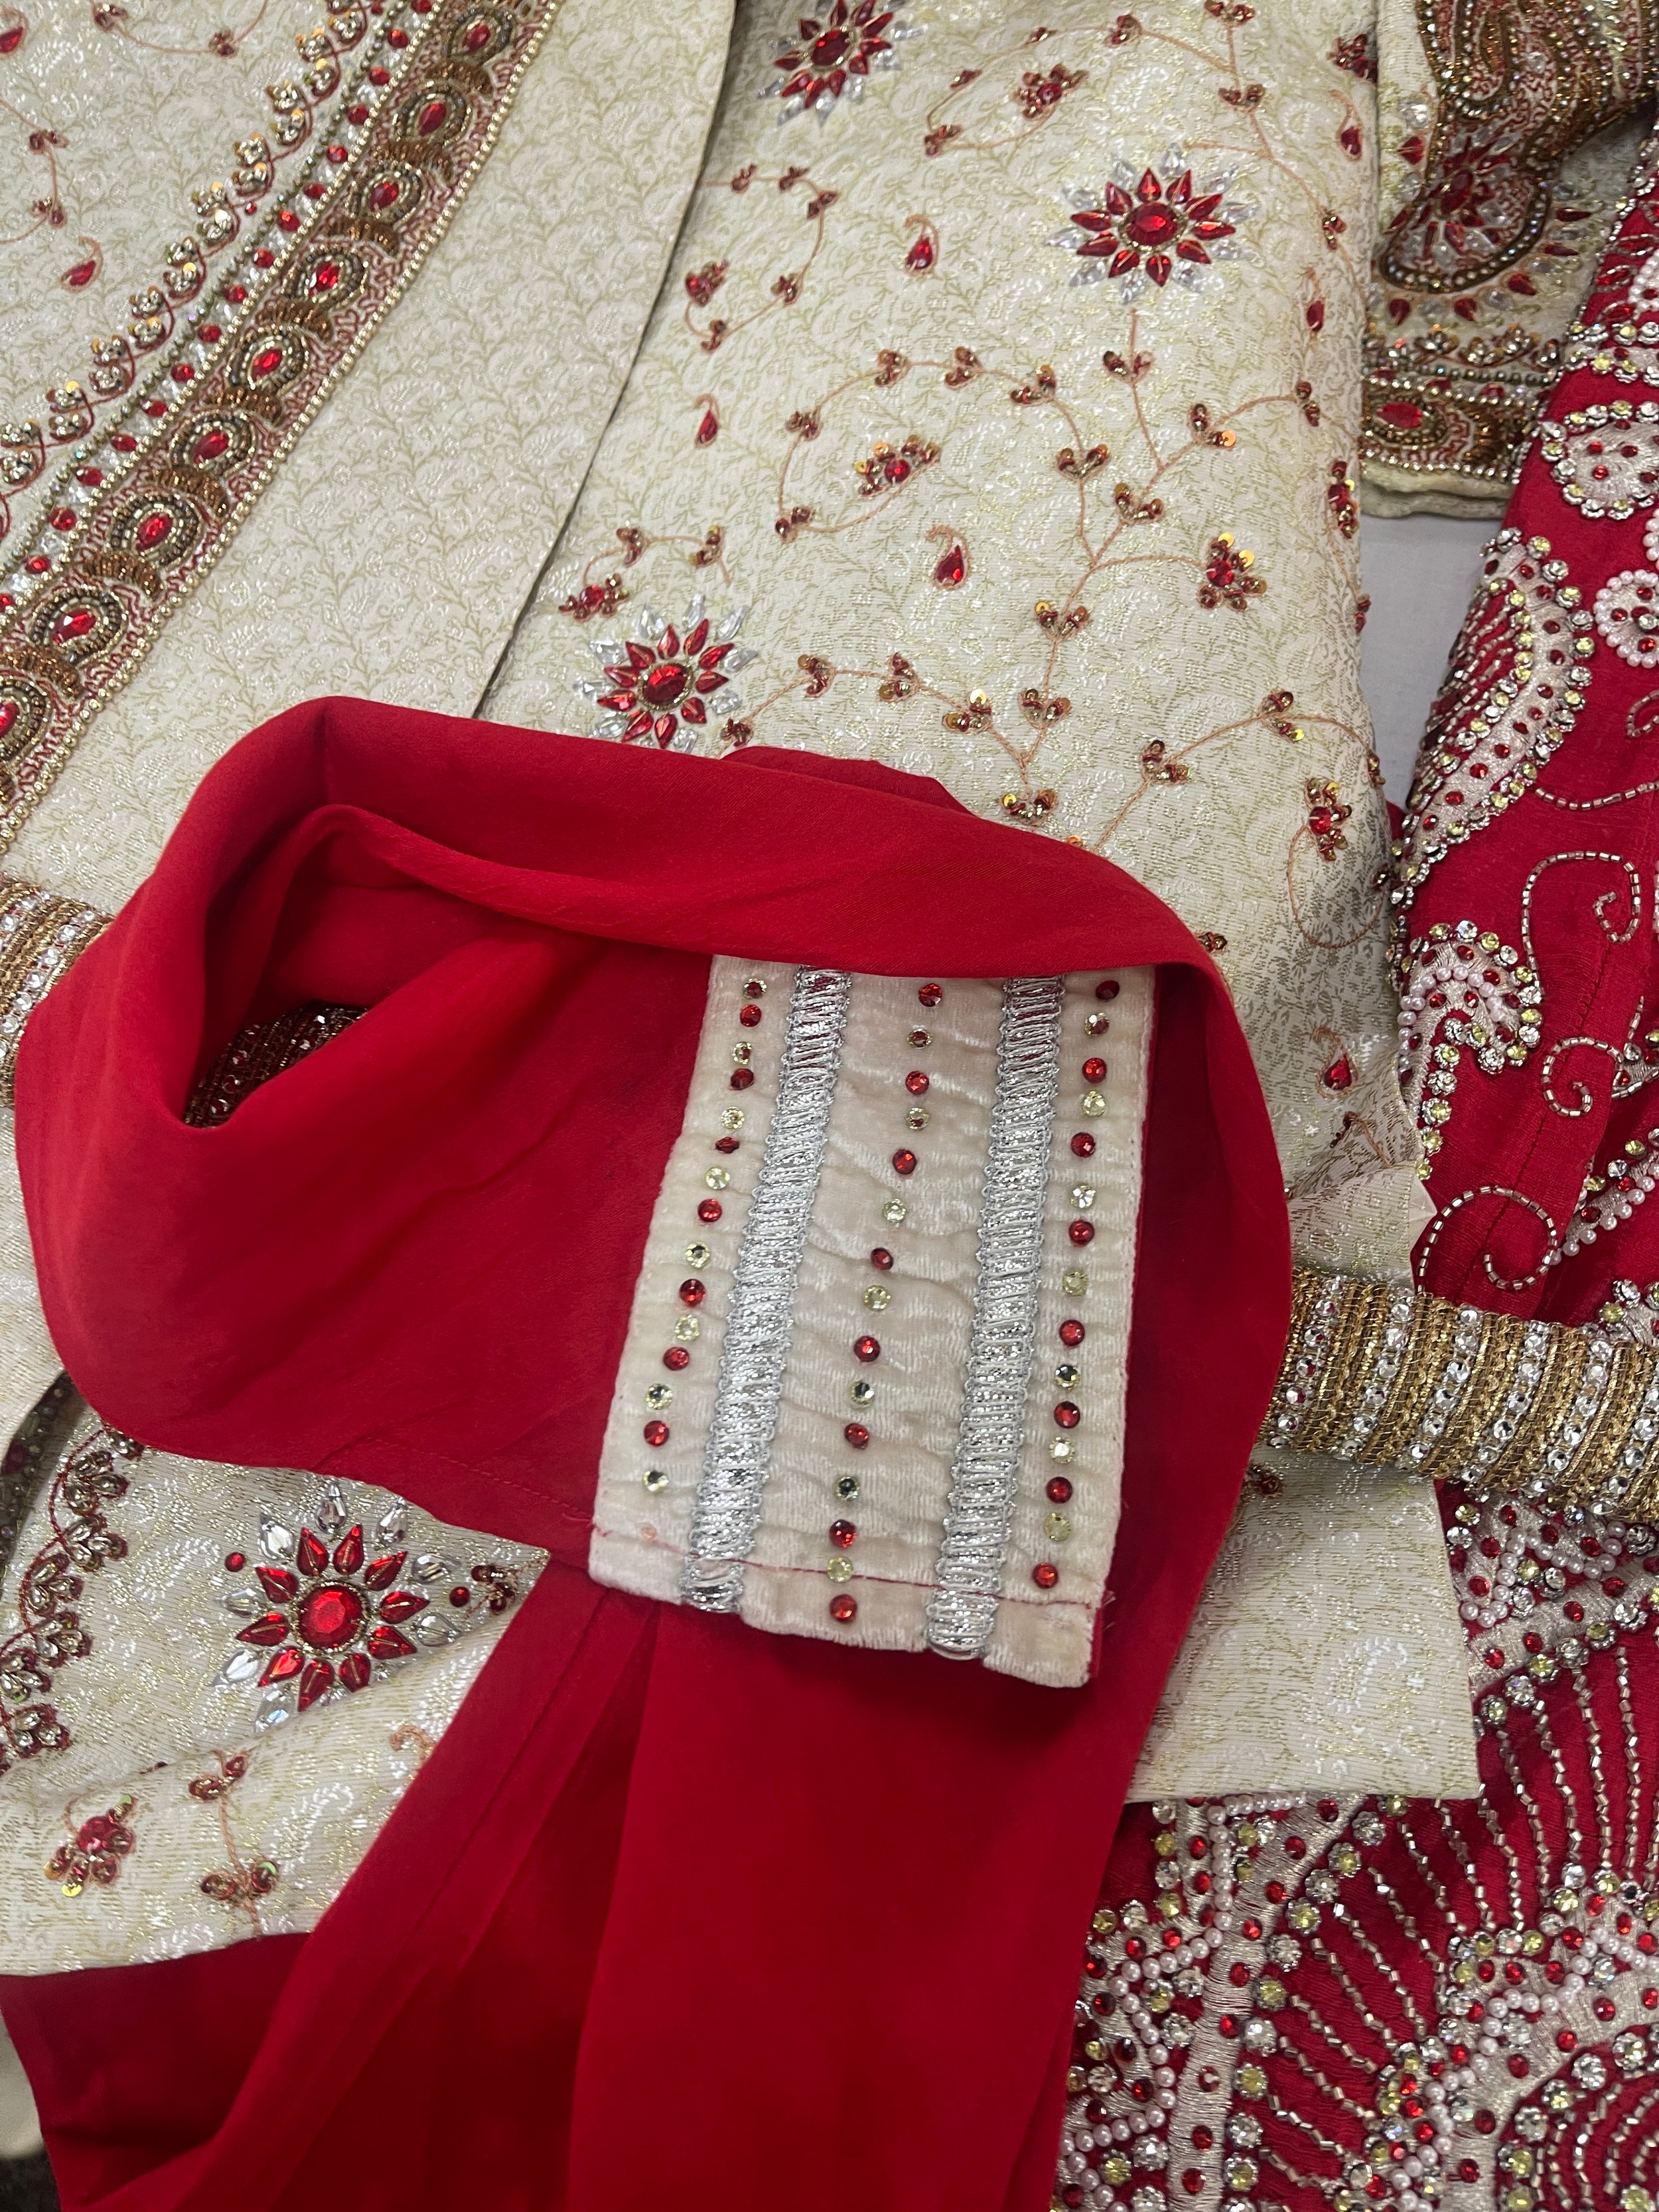 Genuine Indian ladies wedding trousers, dress and head scarf, fully lined with hand stitched pearls, - Bild 8 aus 11